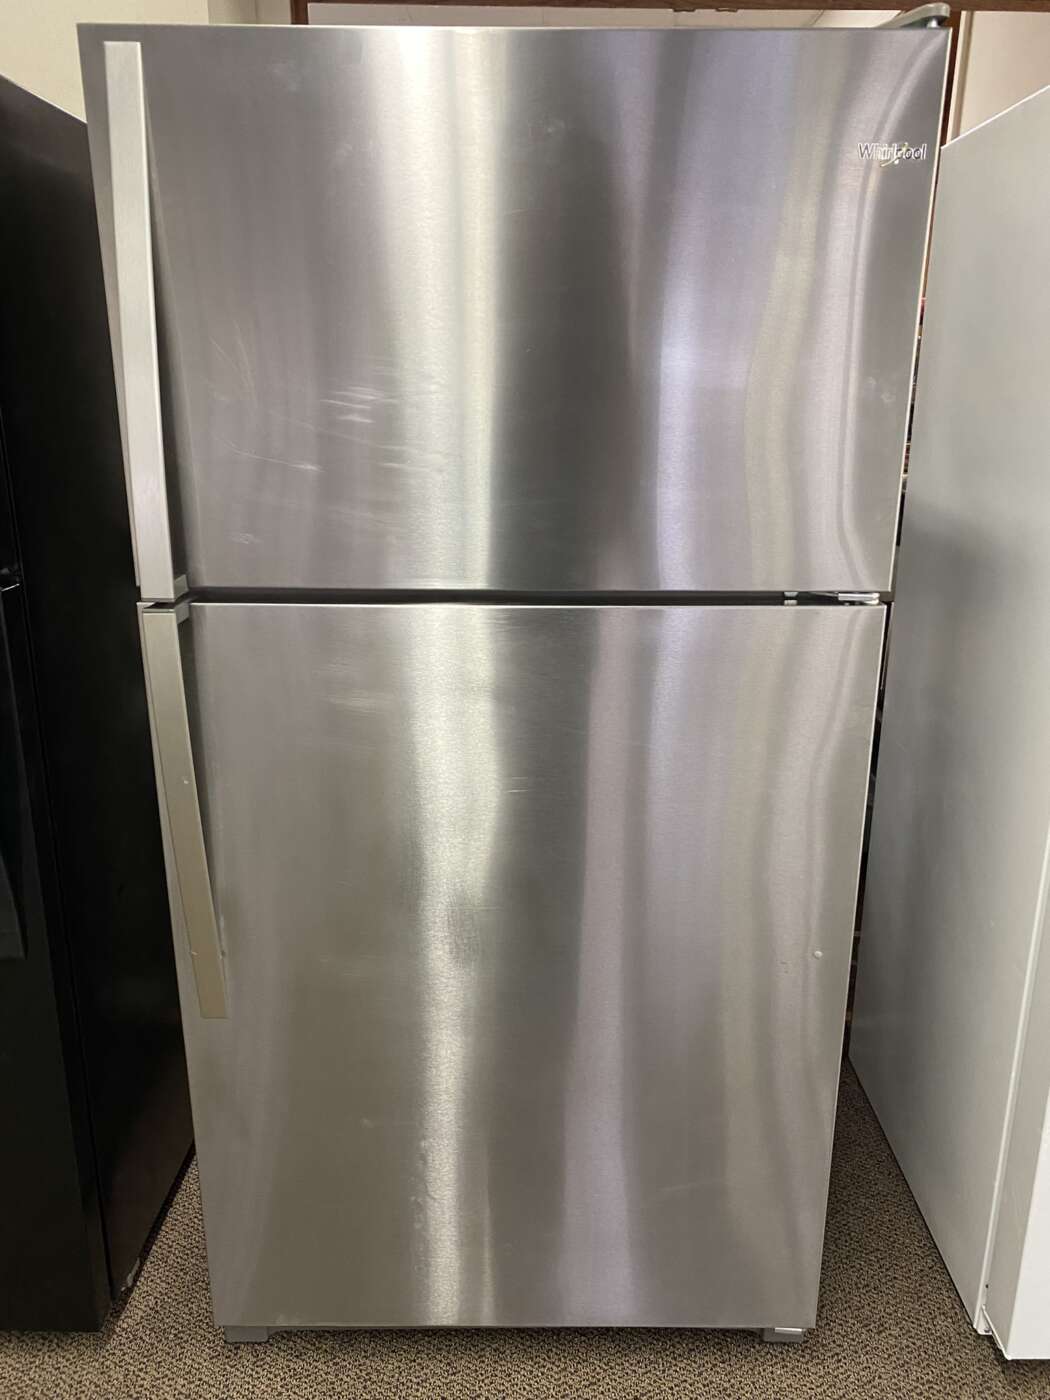 Reconditioned WHIRLPOOL 21 Cu. Ft. Top-Freezer Refrigerator – Stainless